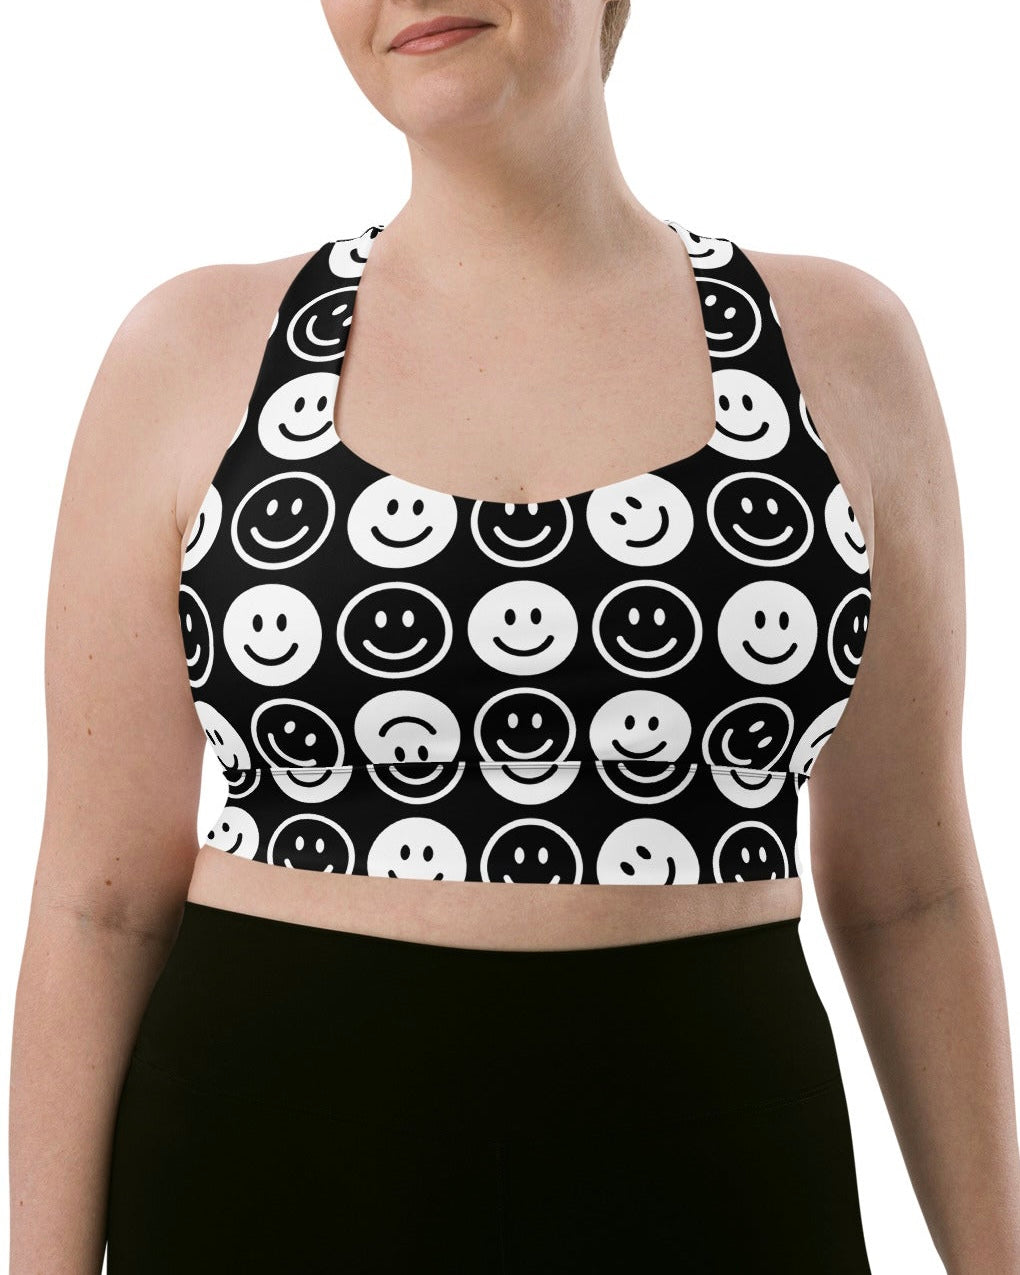 All Smiles Longline Top, Sports Top, - One Stop Rave